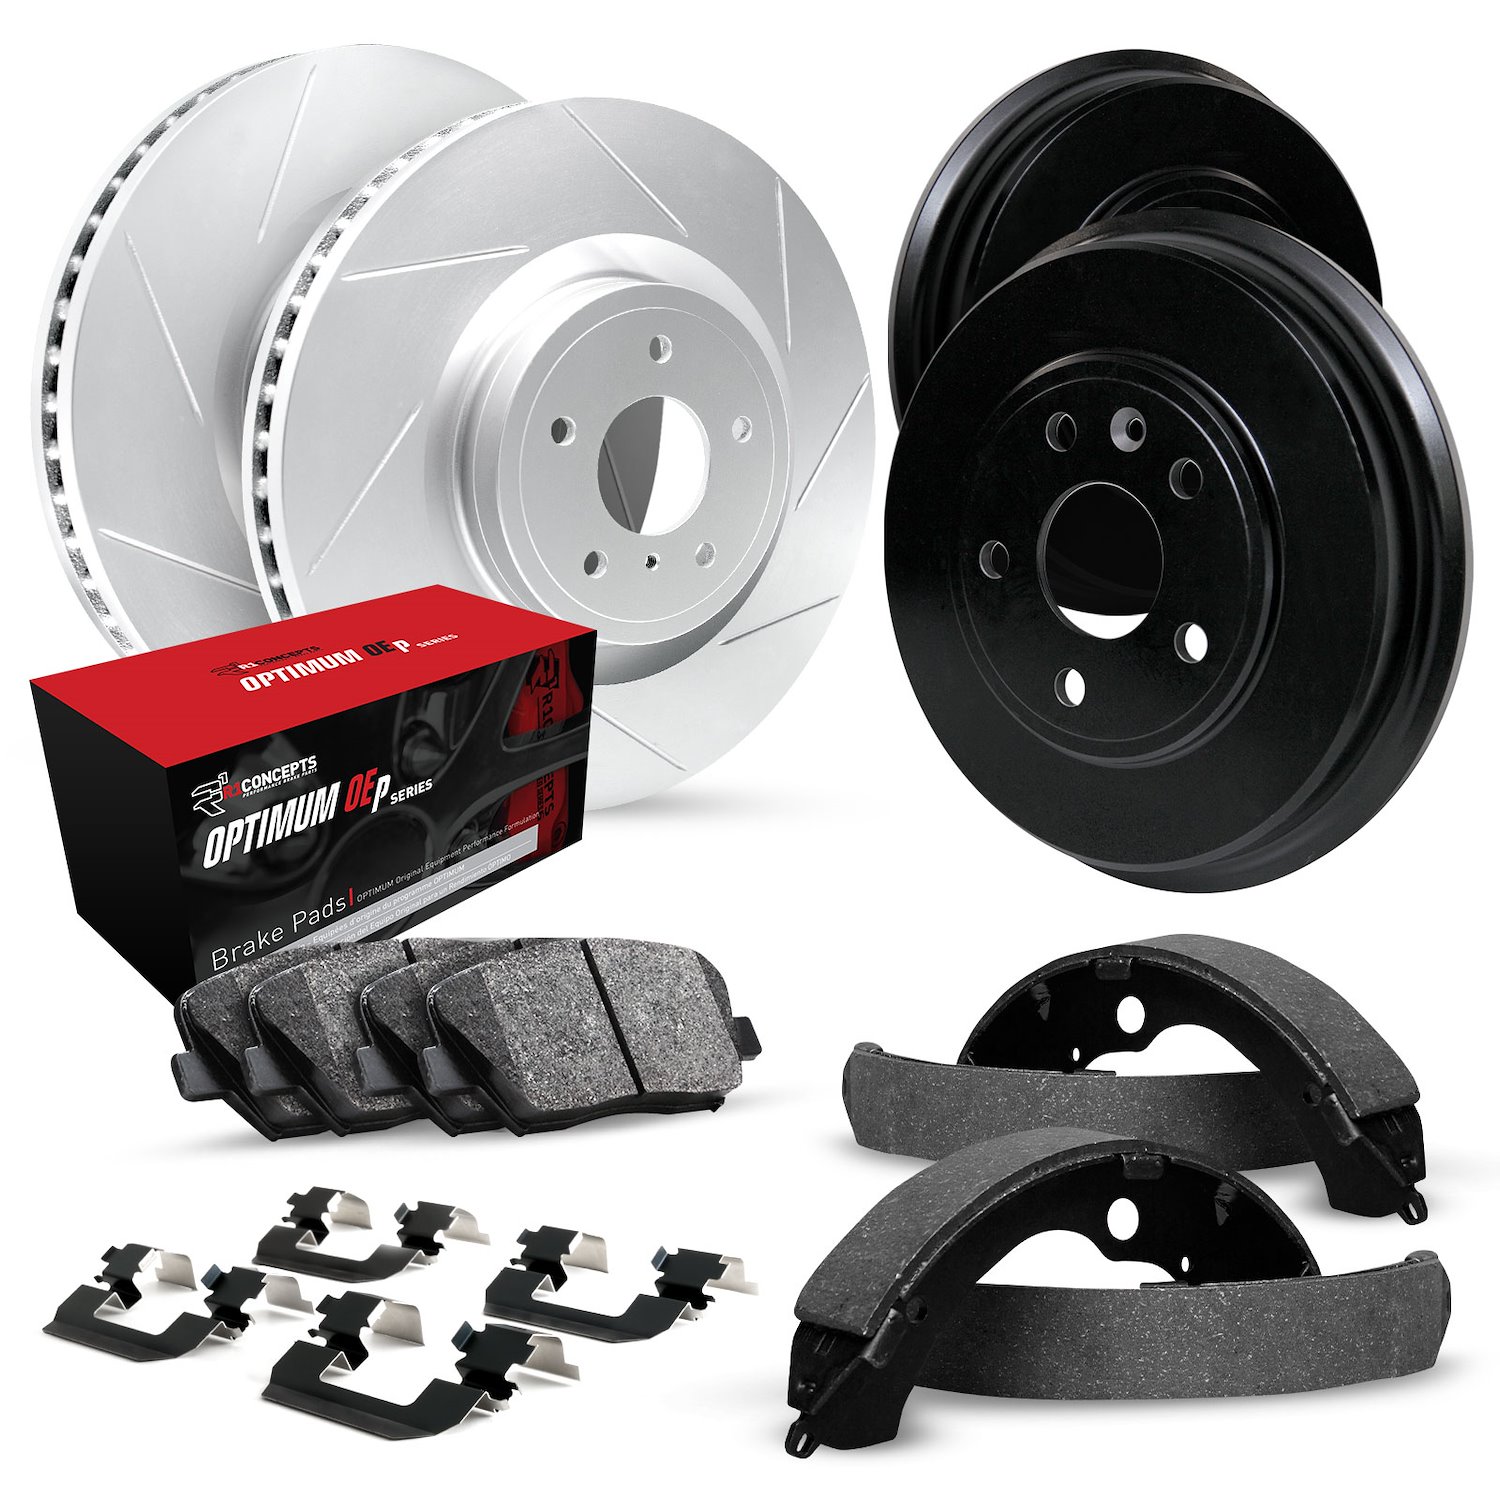 GEO-Carbon Slotted Brake Rotor & Drum Set w/Optimum OE Pads, Shoes, & Hardware, 2001-2007 Ford/Lincoln/Mercury/Mazda